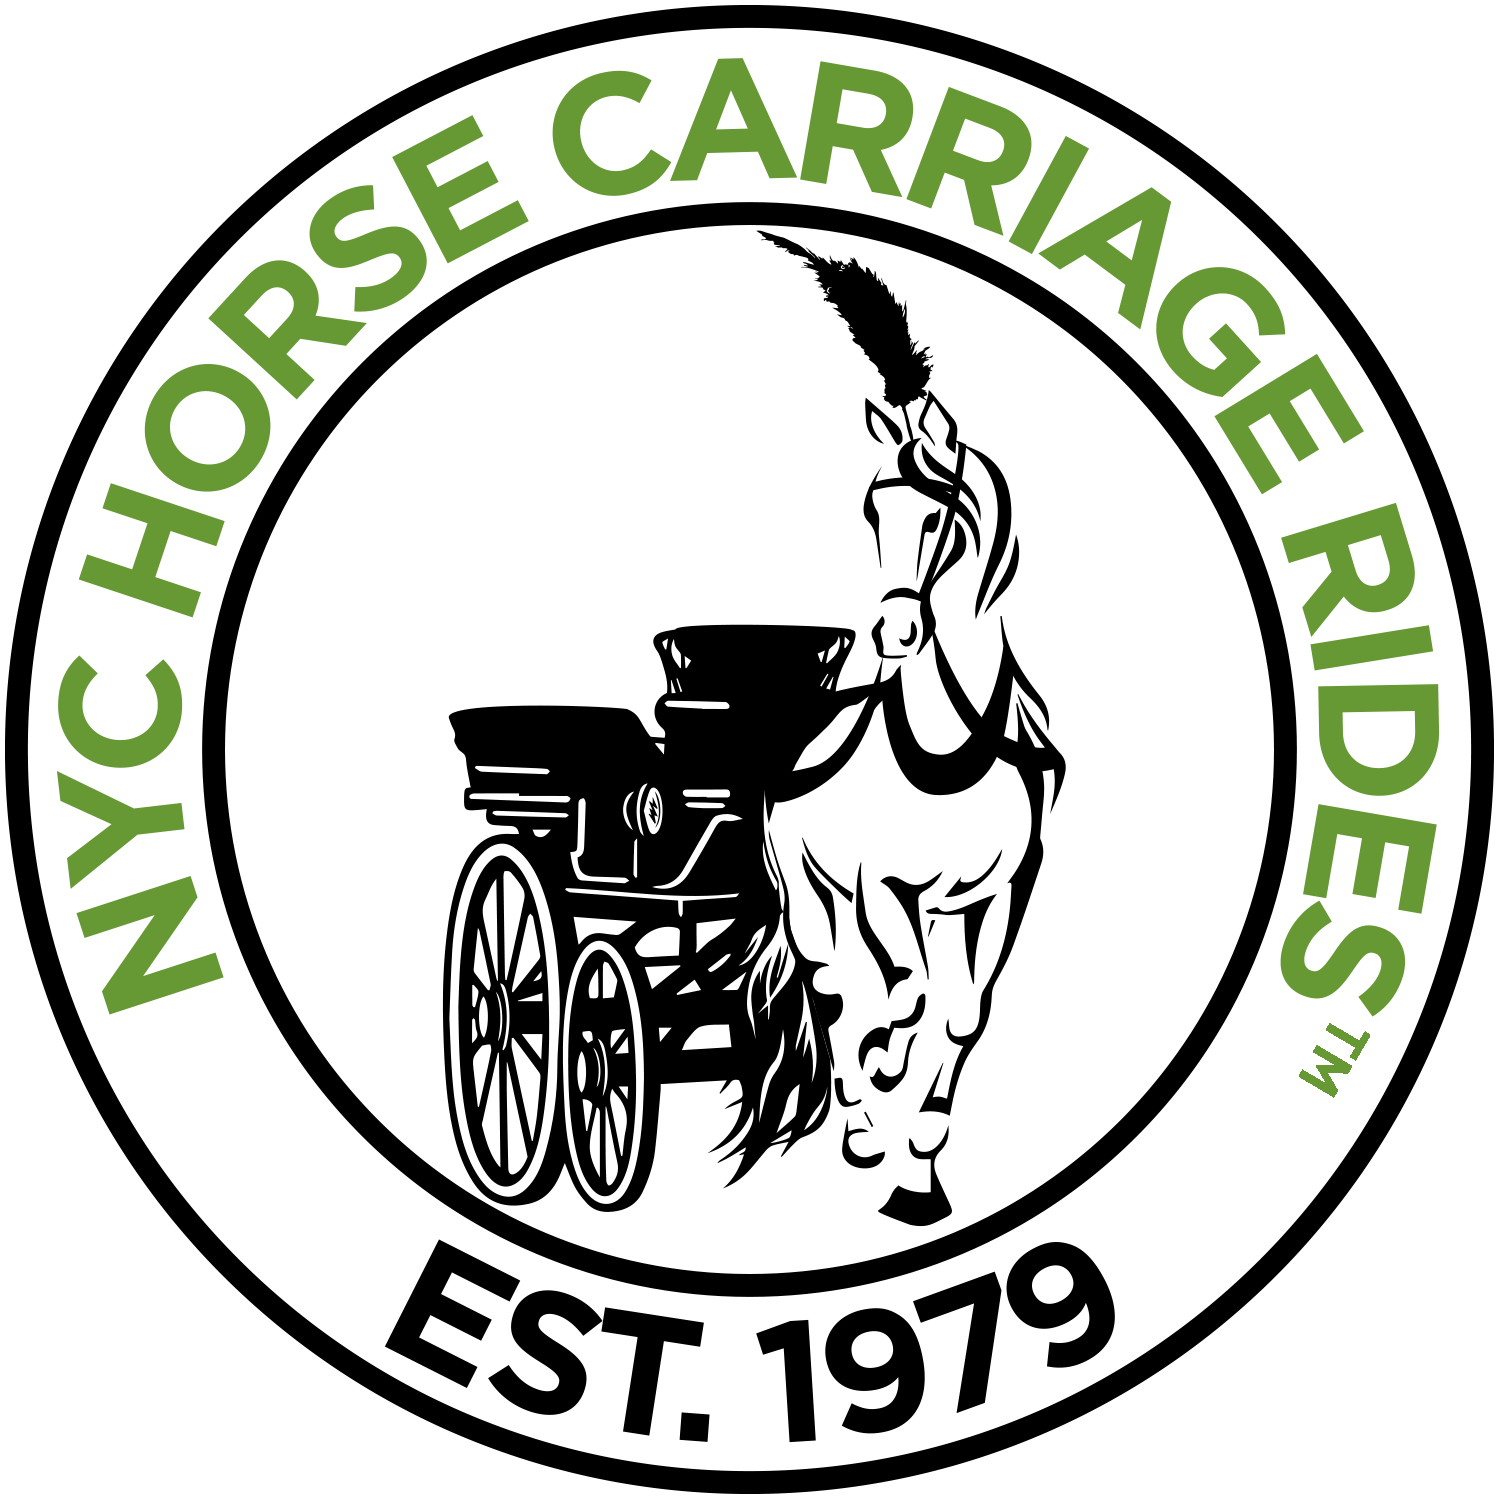 NYC Horse Carriage Rides - Central Park Carriage Rides - Proudly Serving Central Park Horse Carriage Rides since 1979